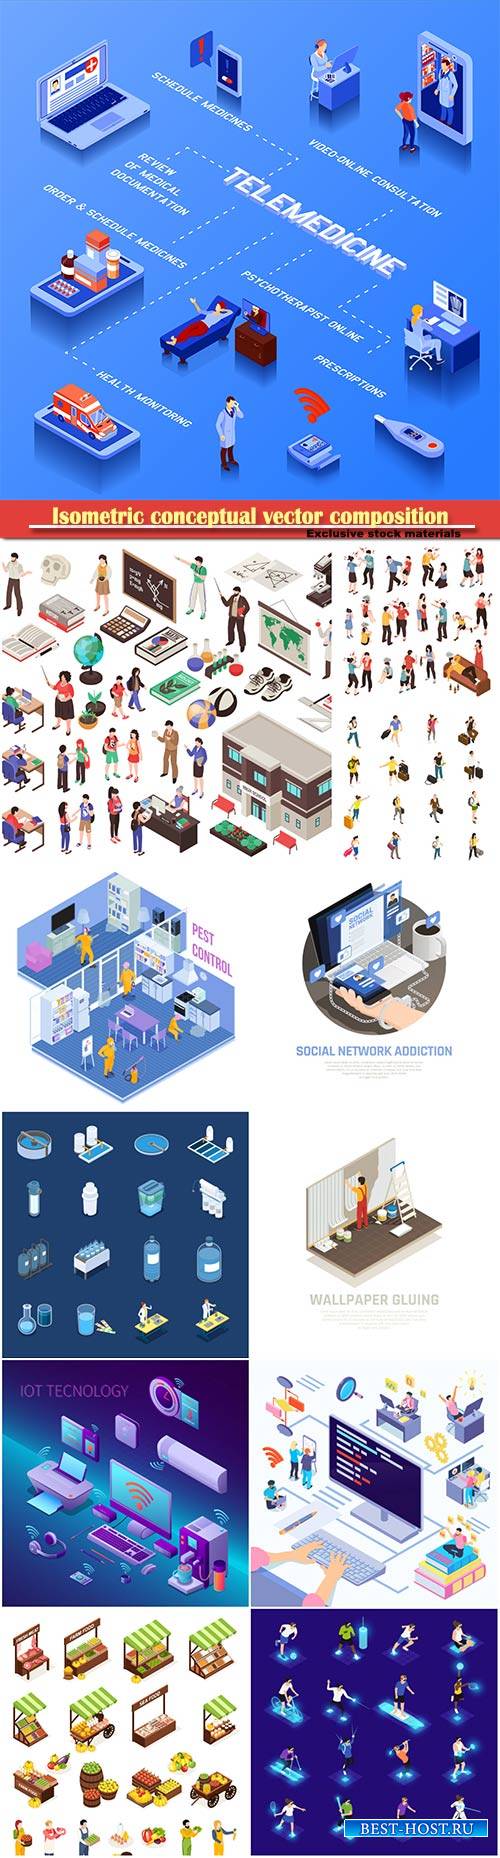 Isometric conceptual vector composition, infographics template # 60